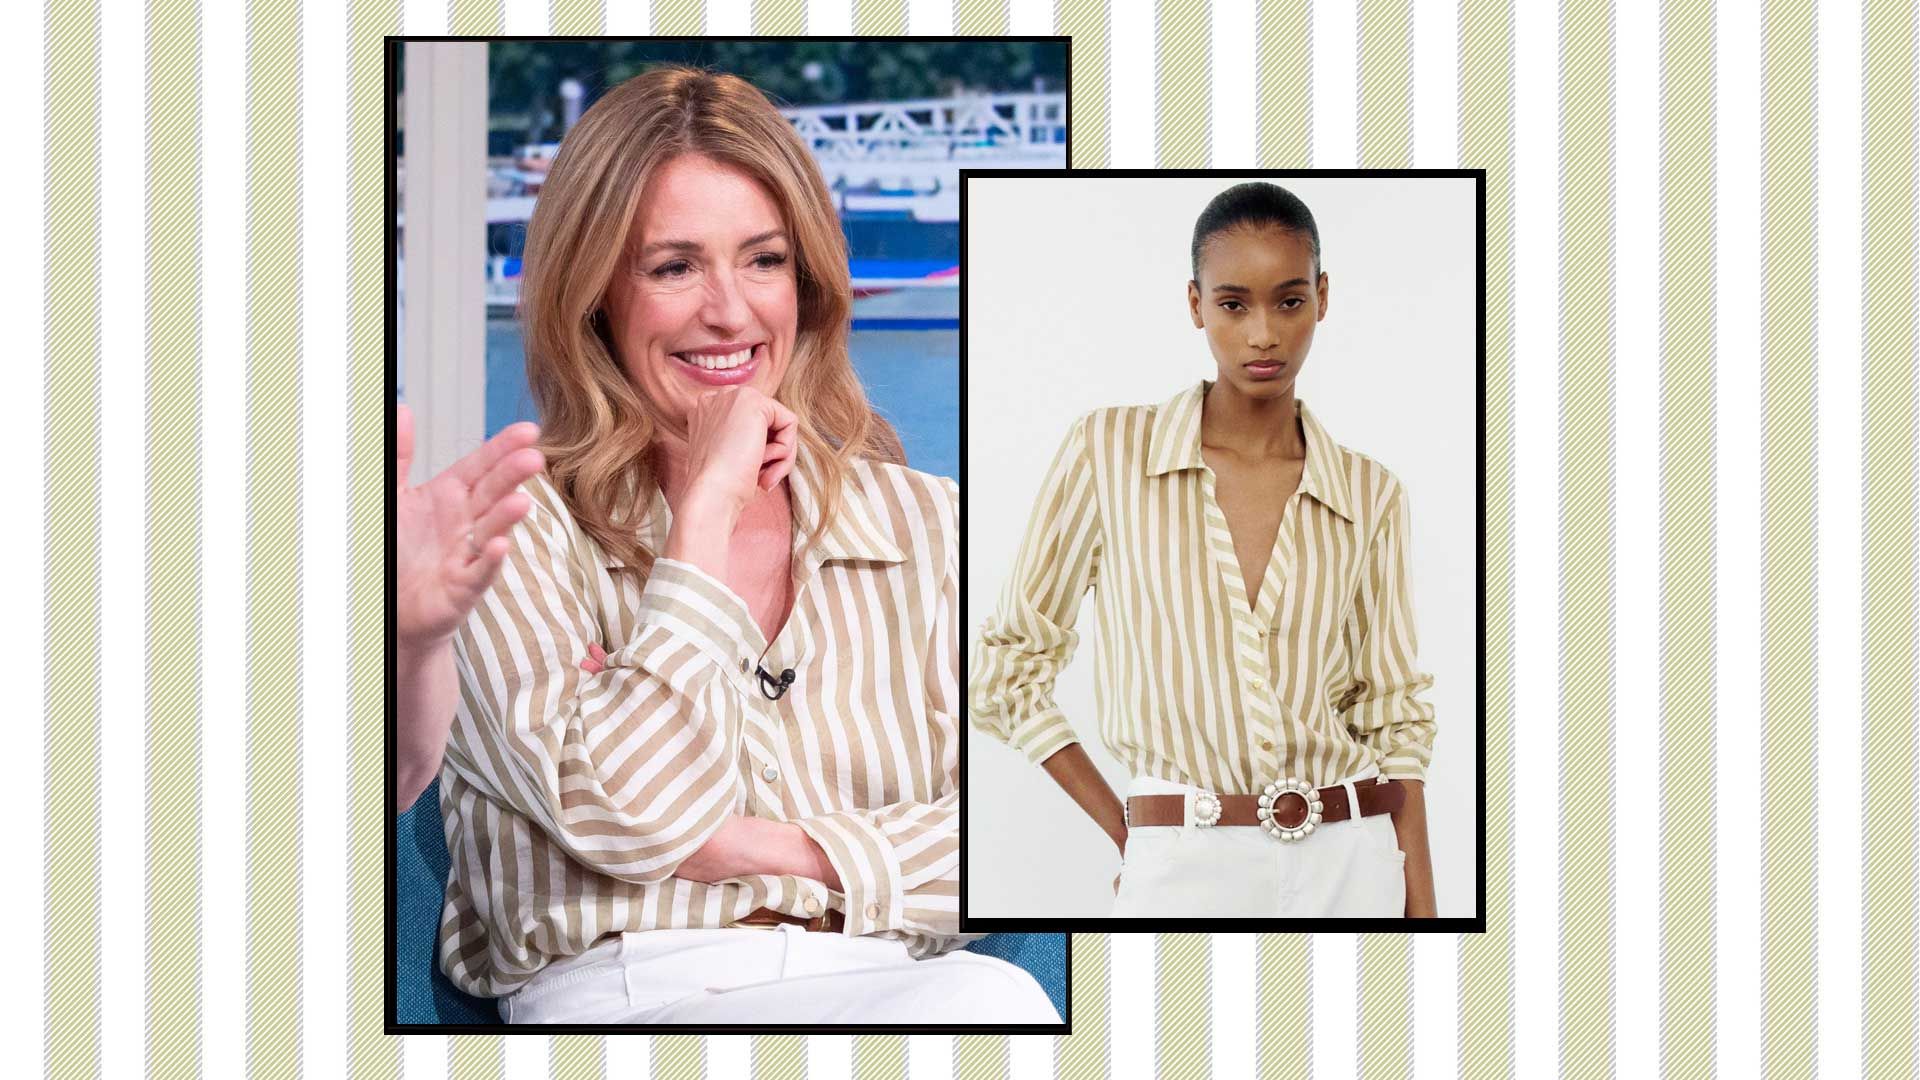 Cat Deeley got the striped shirt memo – and I’ve found 5 striped shirts just like Cat’s